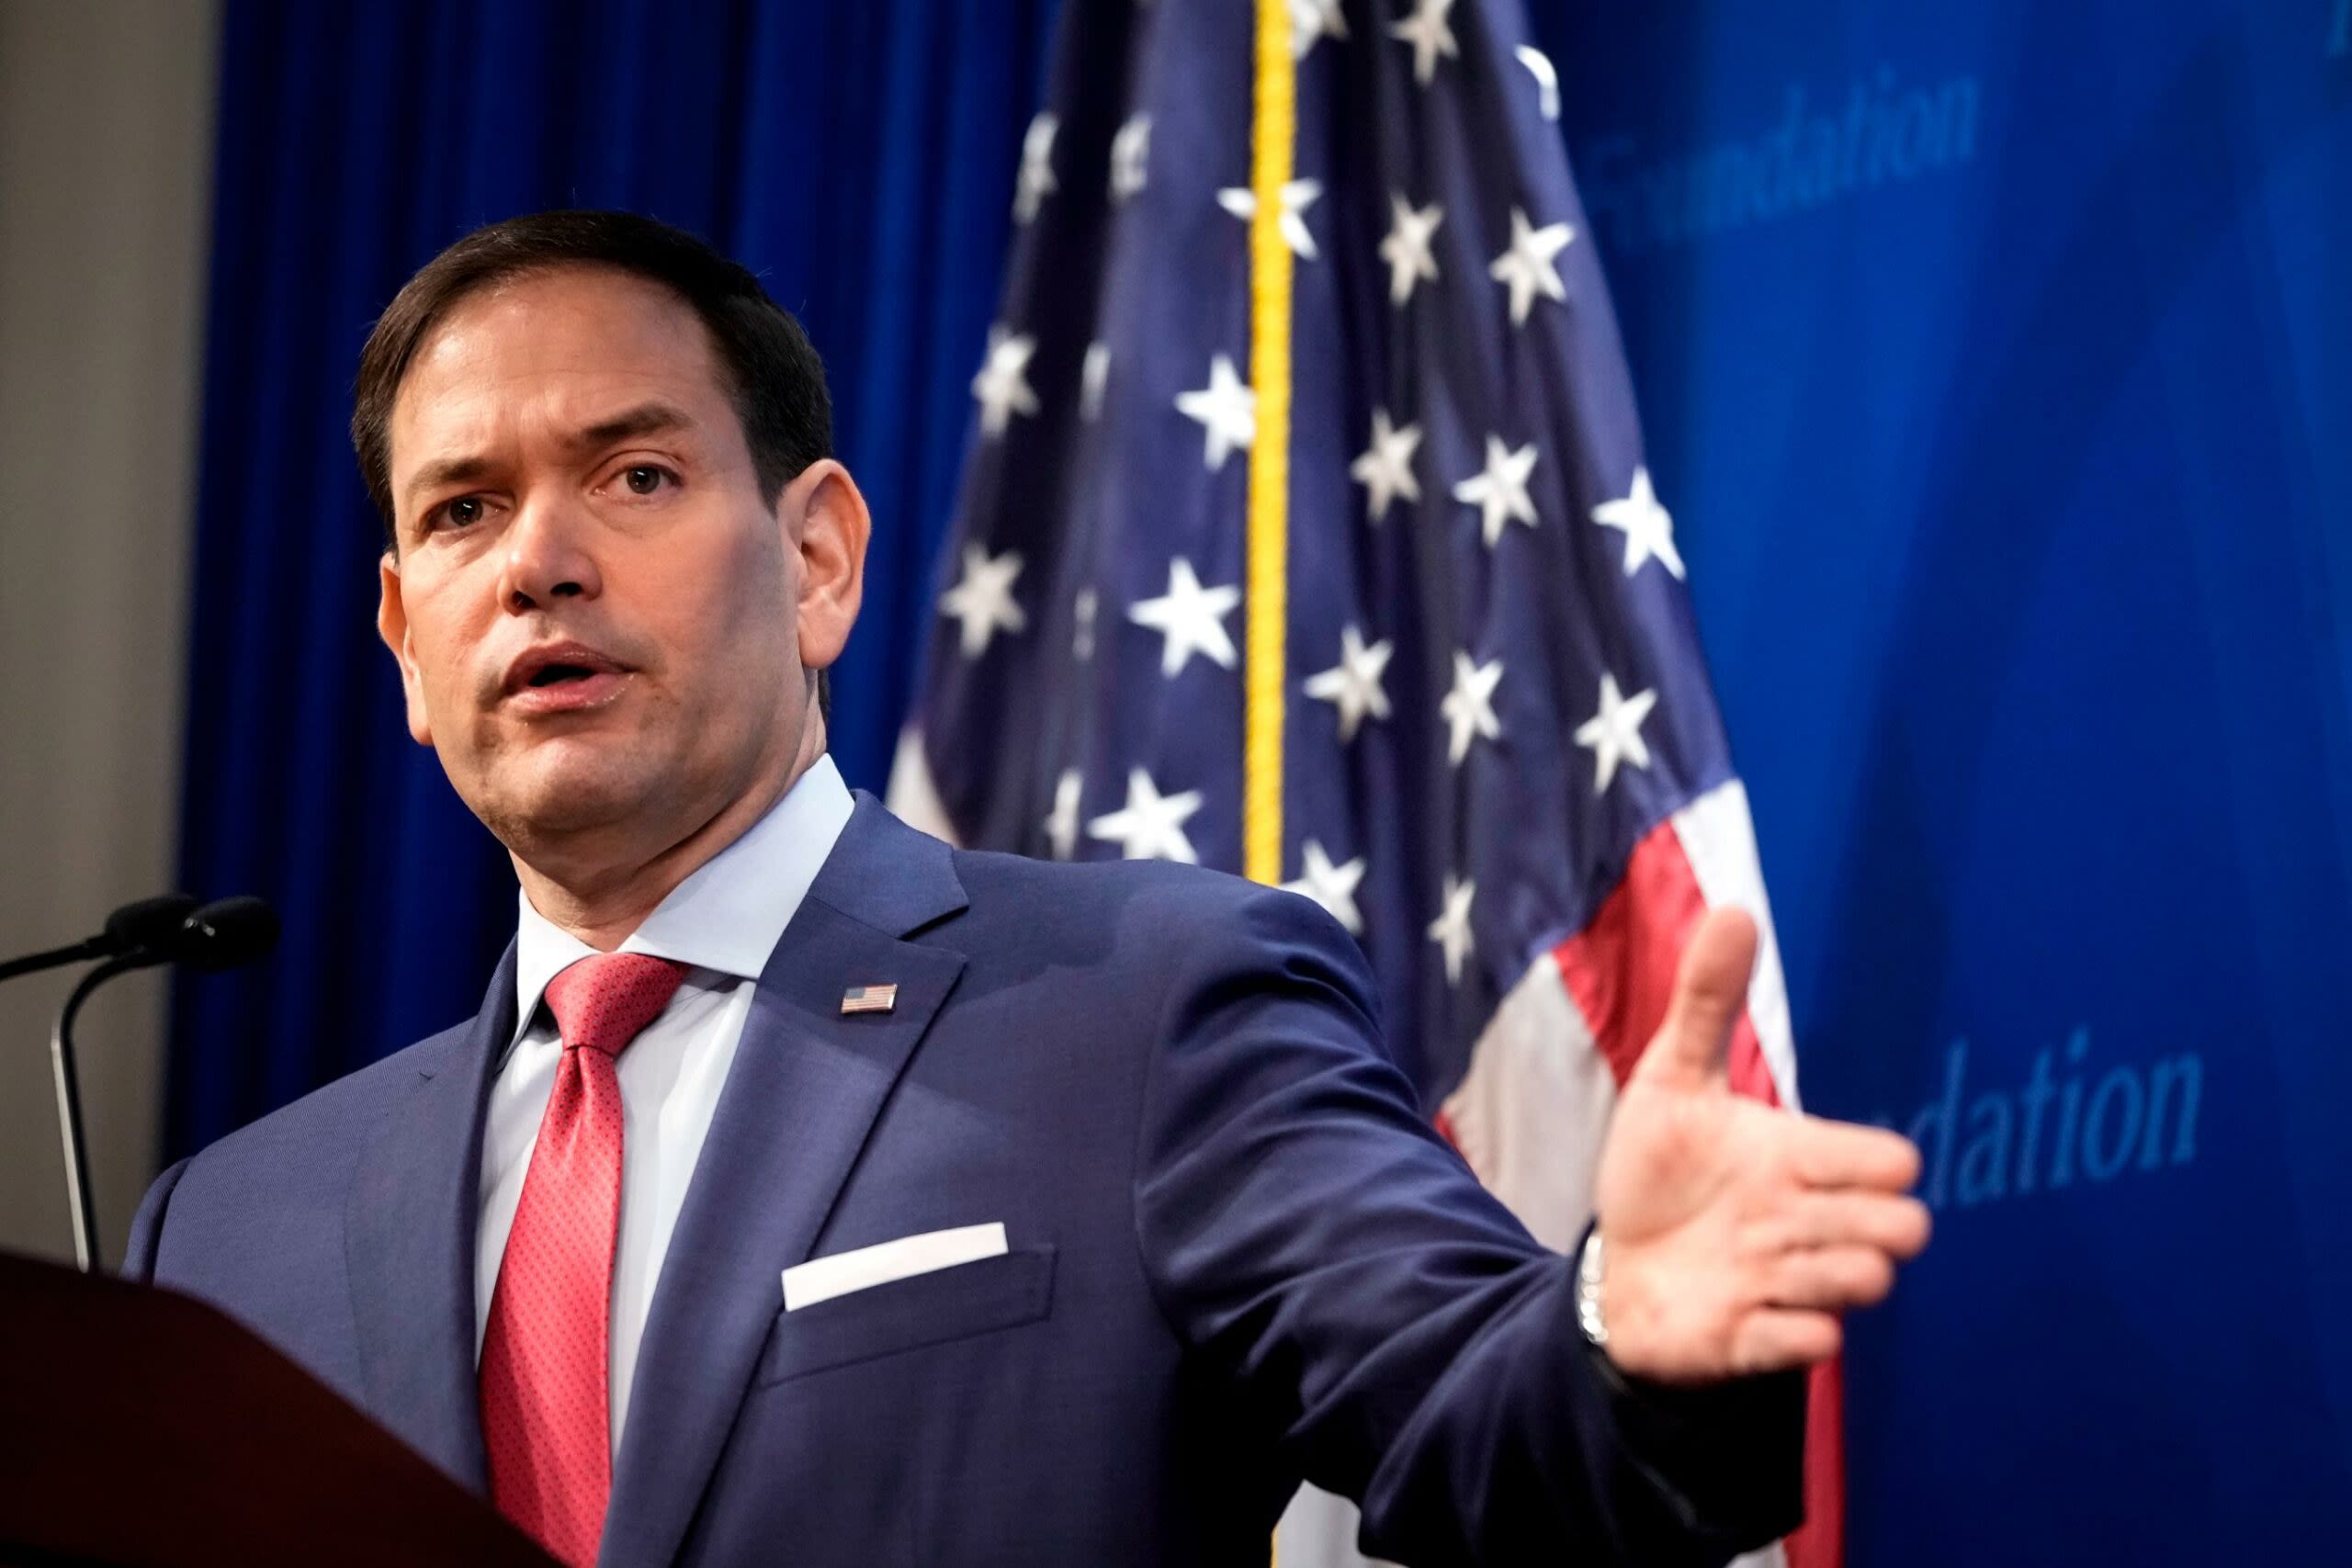 Marco Rubio accuses Democratic donors of financing campus protests